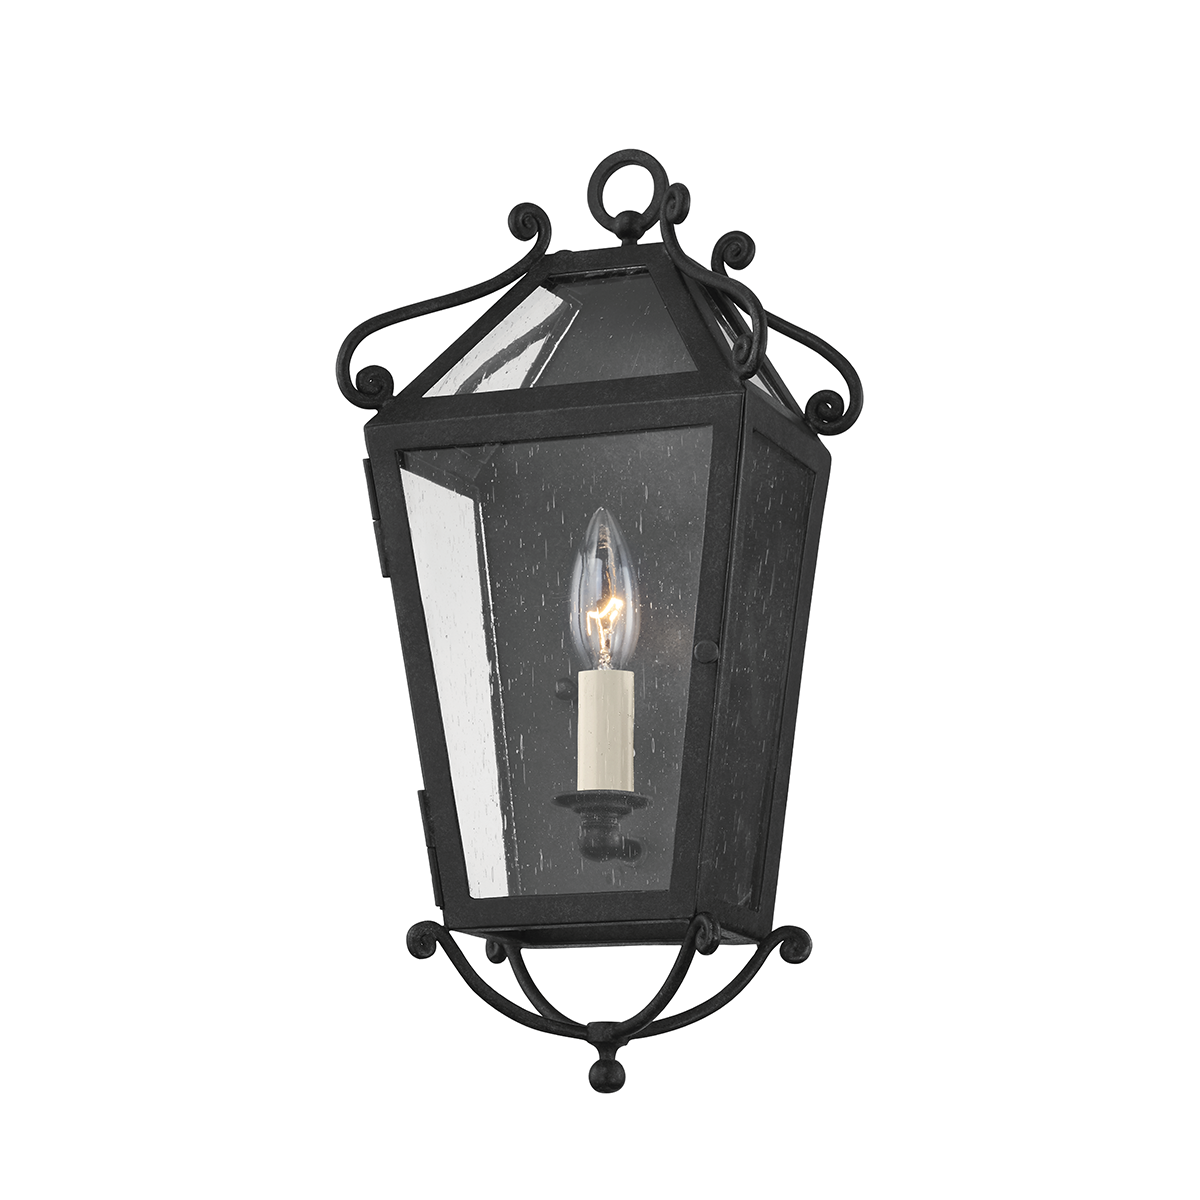 Troy Lighting 1 LIGHT SMALL EXTERIOR WALL SCONCE B4121 Outdoor l Wall Troy Lighting FRENCH IRON  